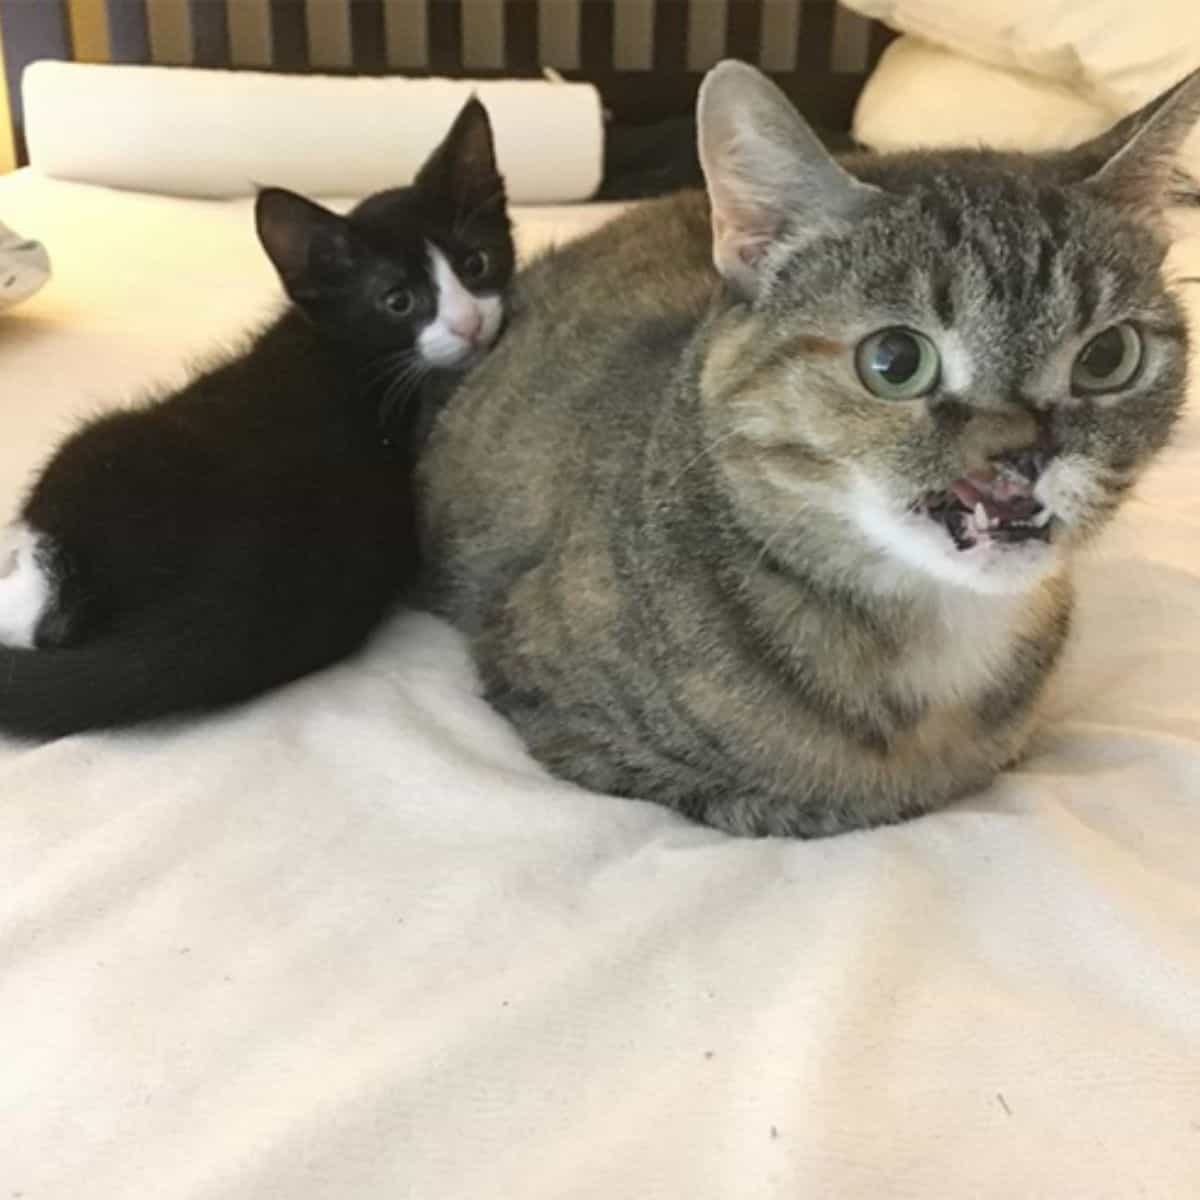 tabby cat shot in the face lying next to kitten